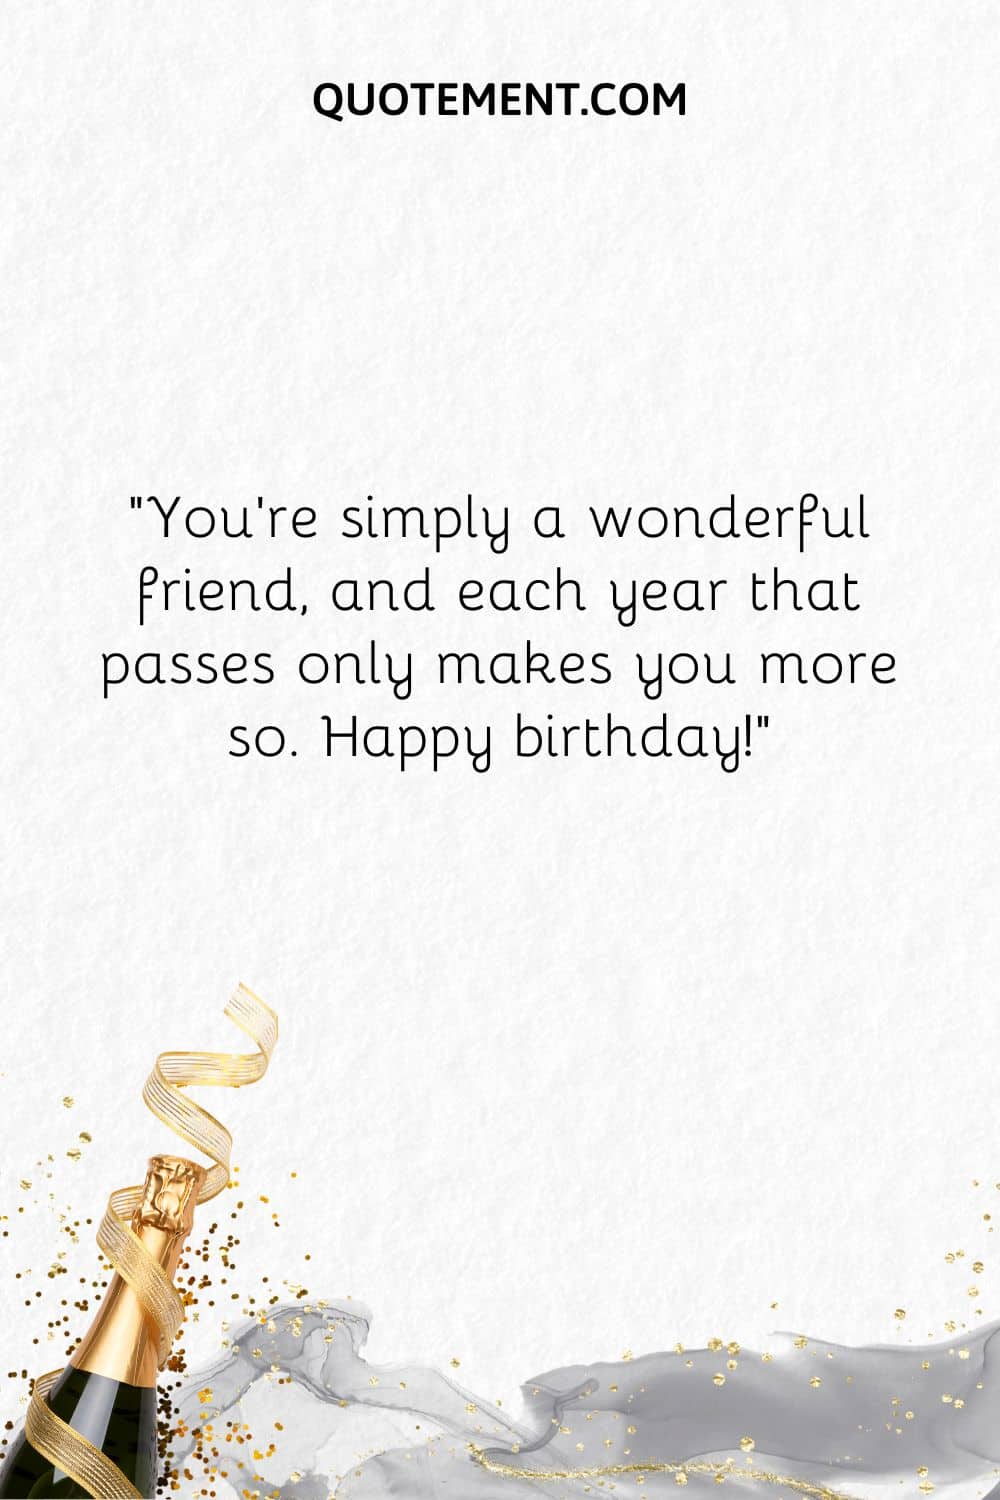 “You’re simply a wonderful friend, and each year that passes only makes you more so. 